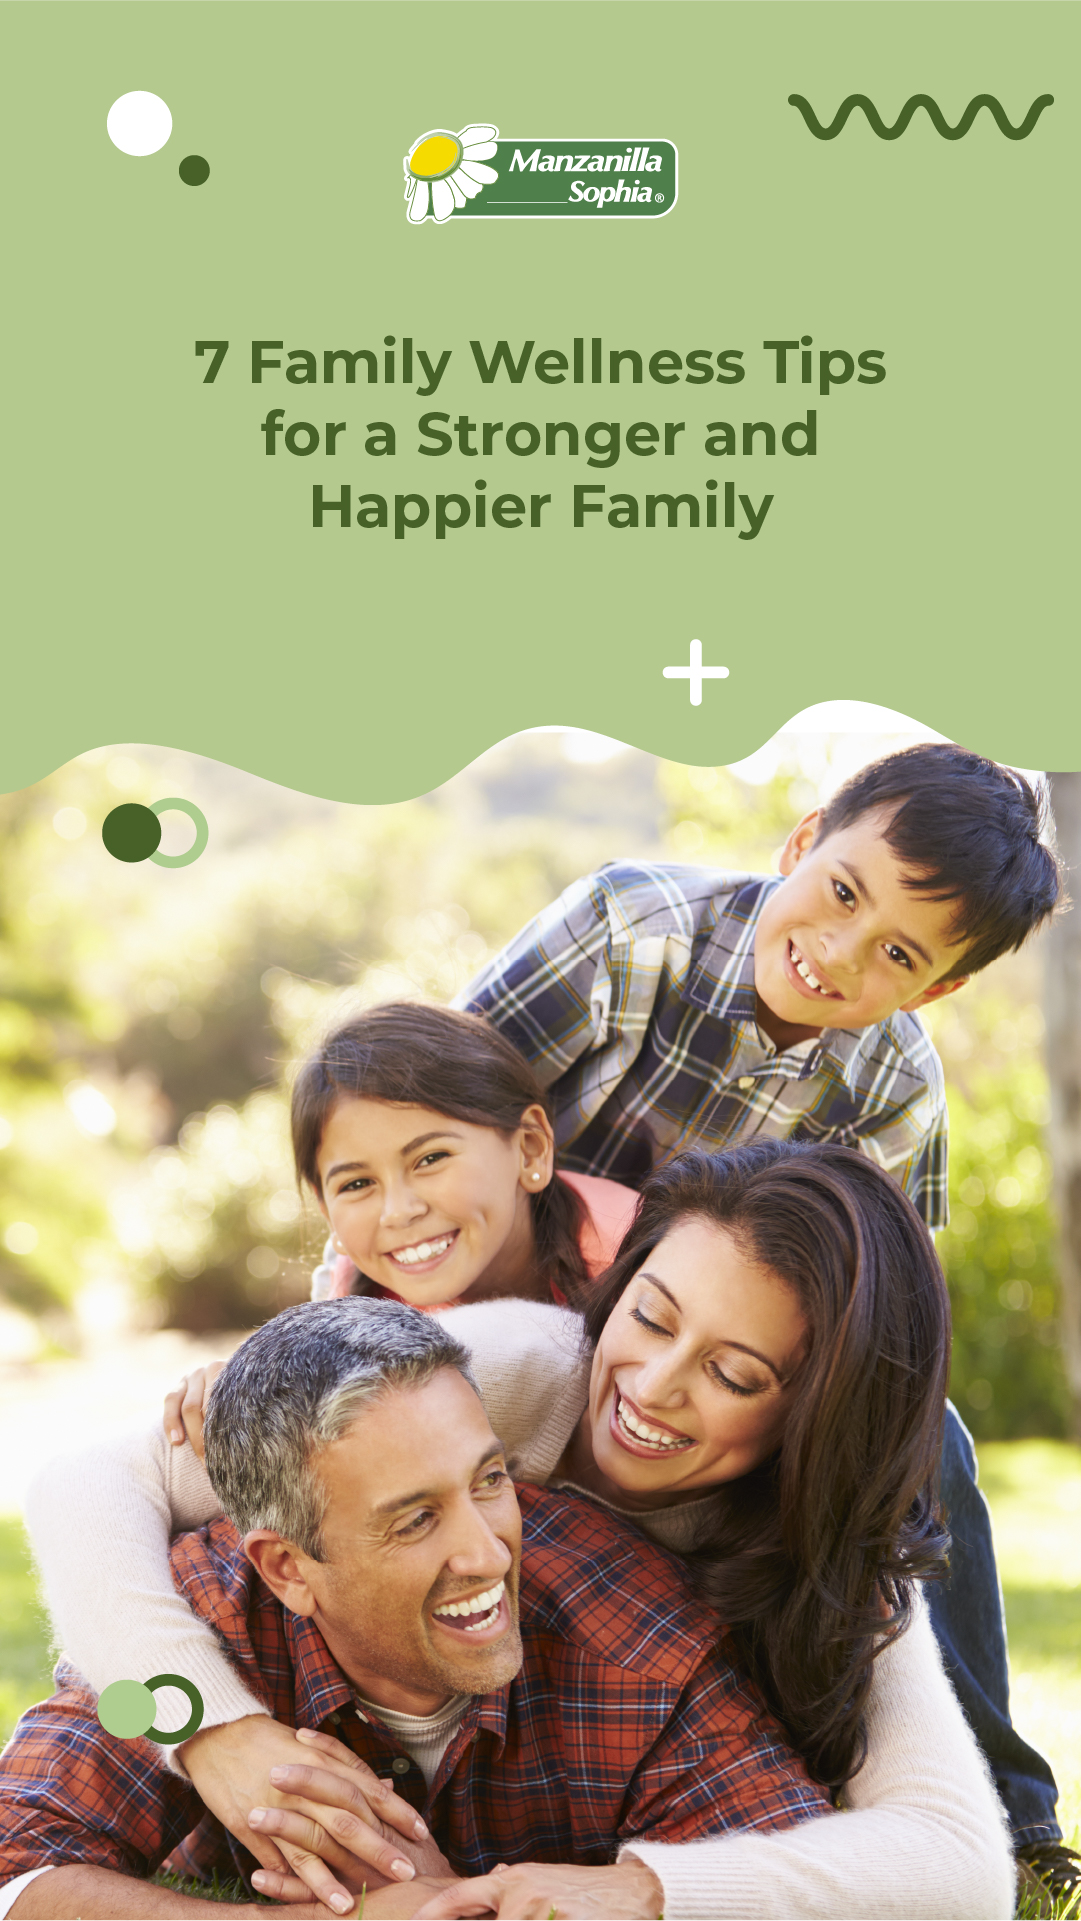 7 Family Wellness Tips for a Stronger and Happier Family - Story